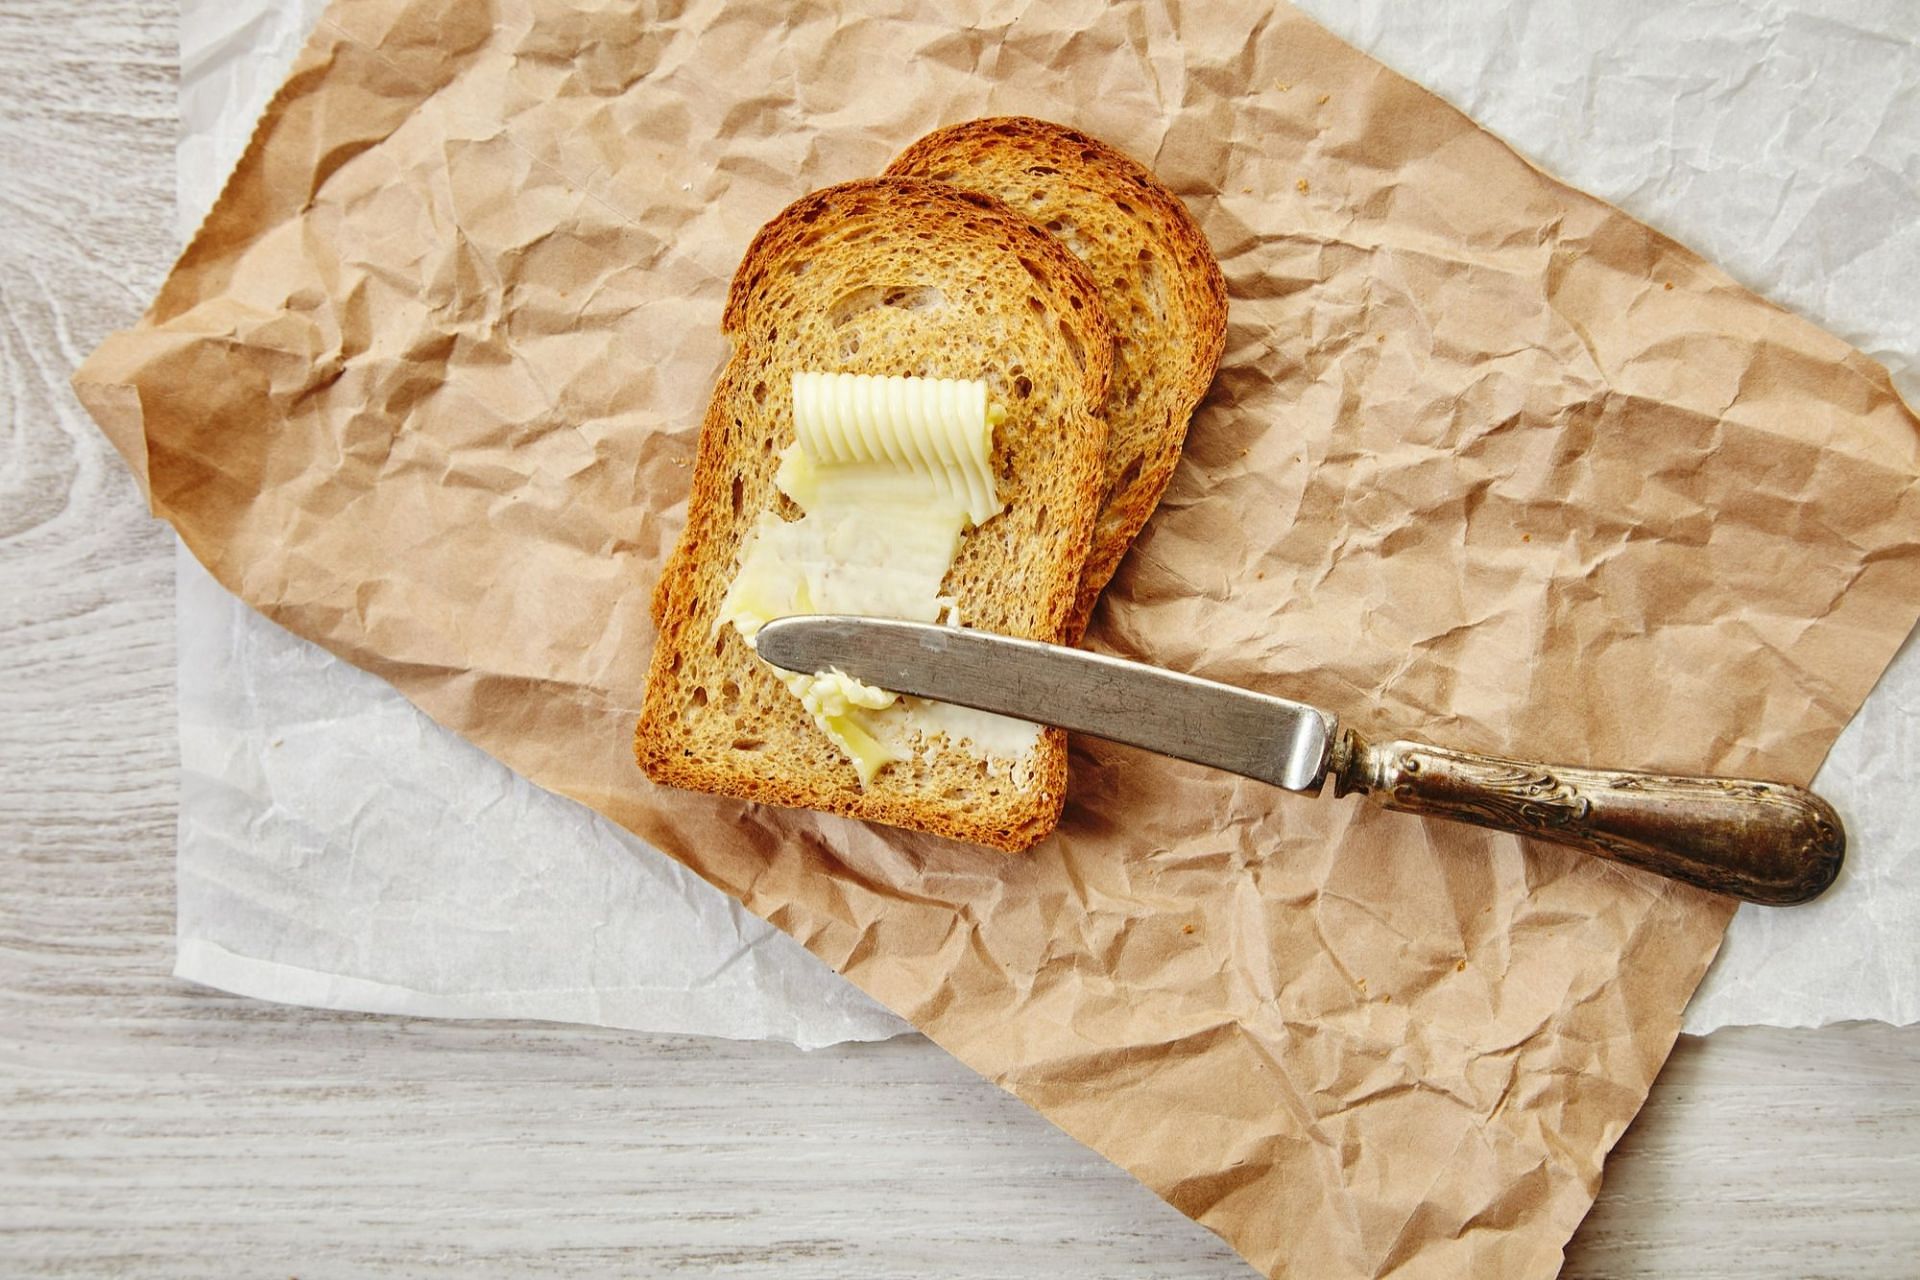 Butter vs. Maragarie: which one will you choose? (Image by bublikhaus on Freepik)